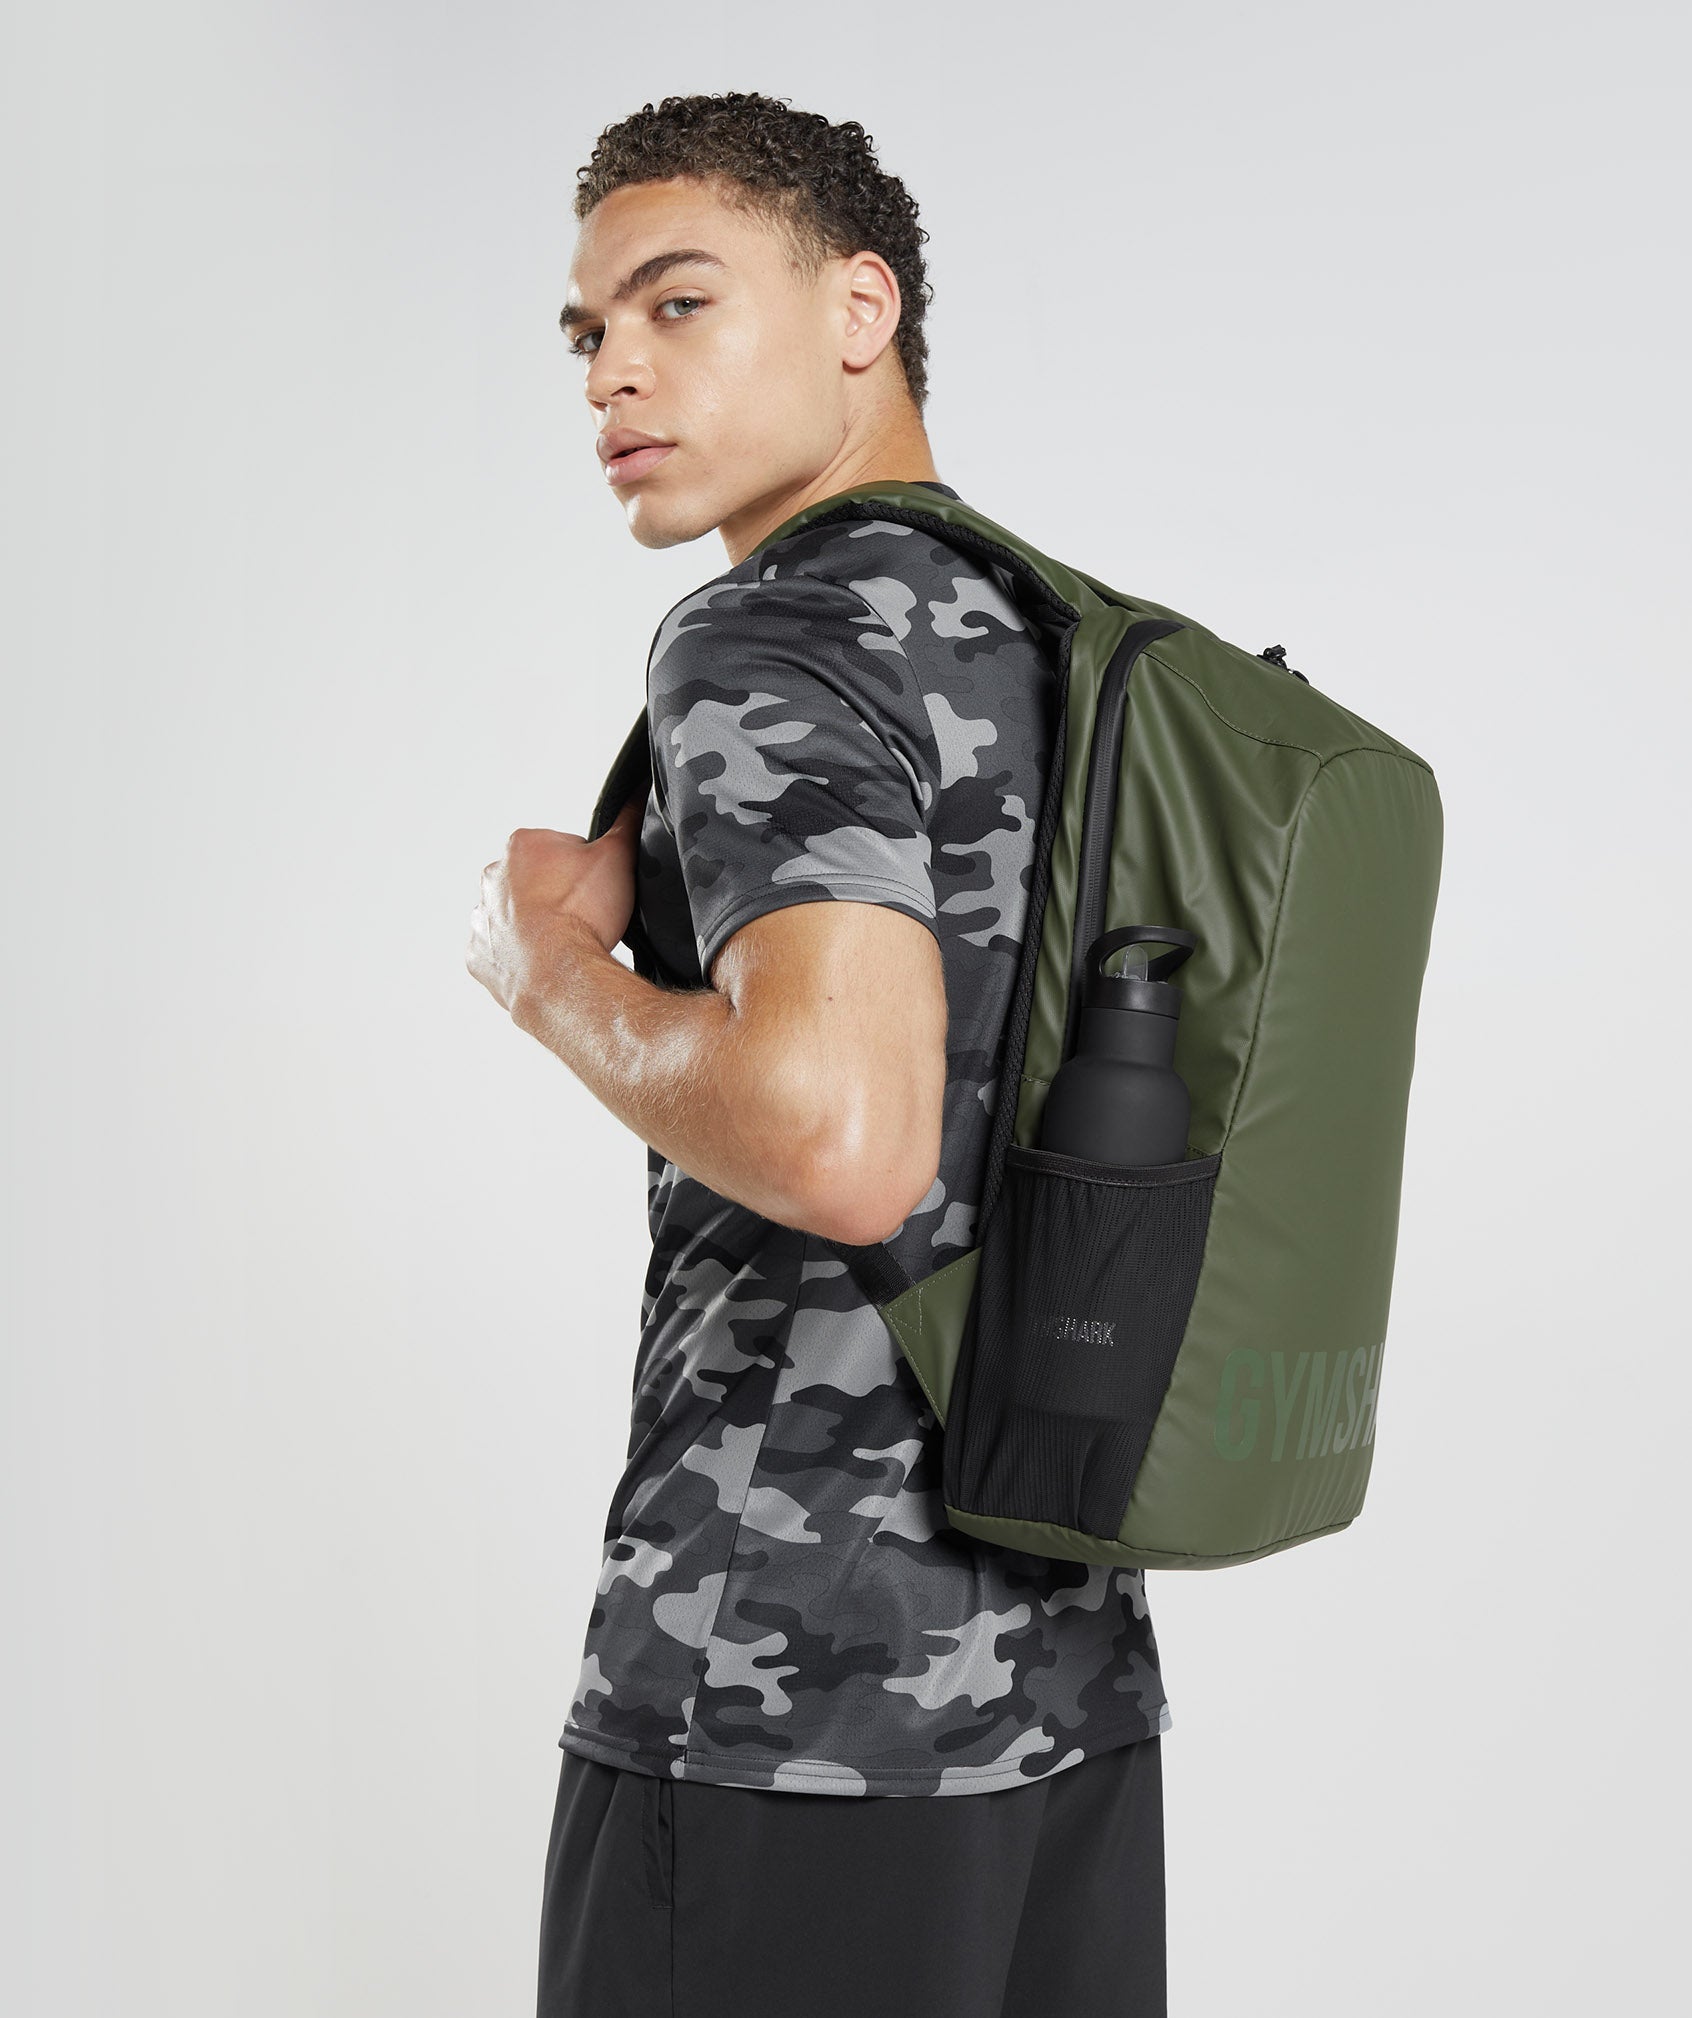 X-Series 0.1 Backpack in Core Olive/Black - view 6